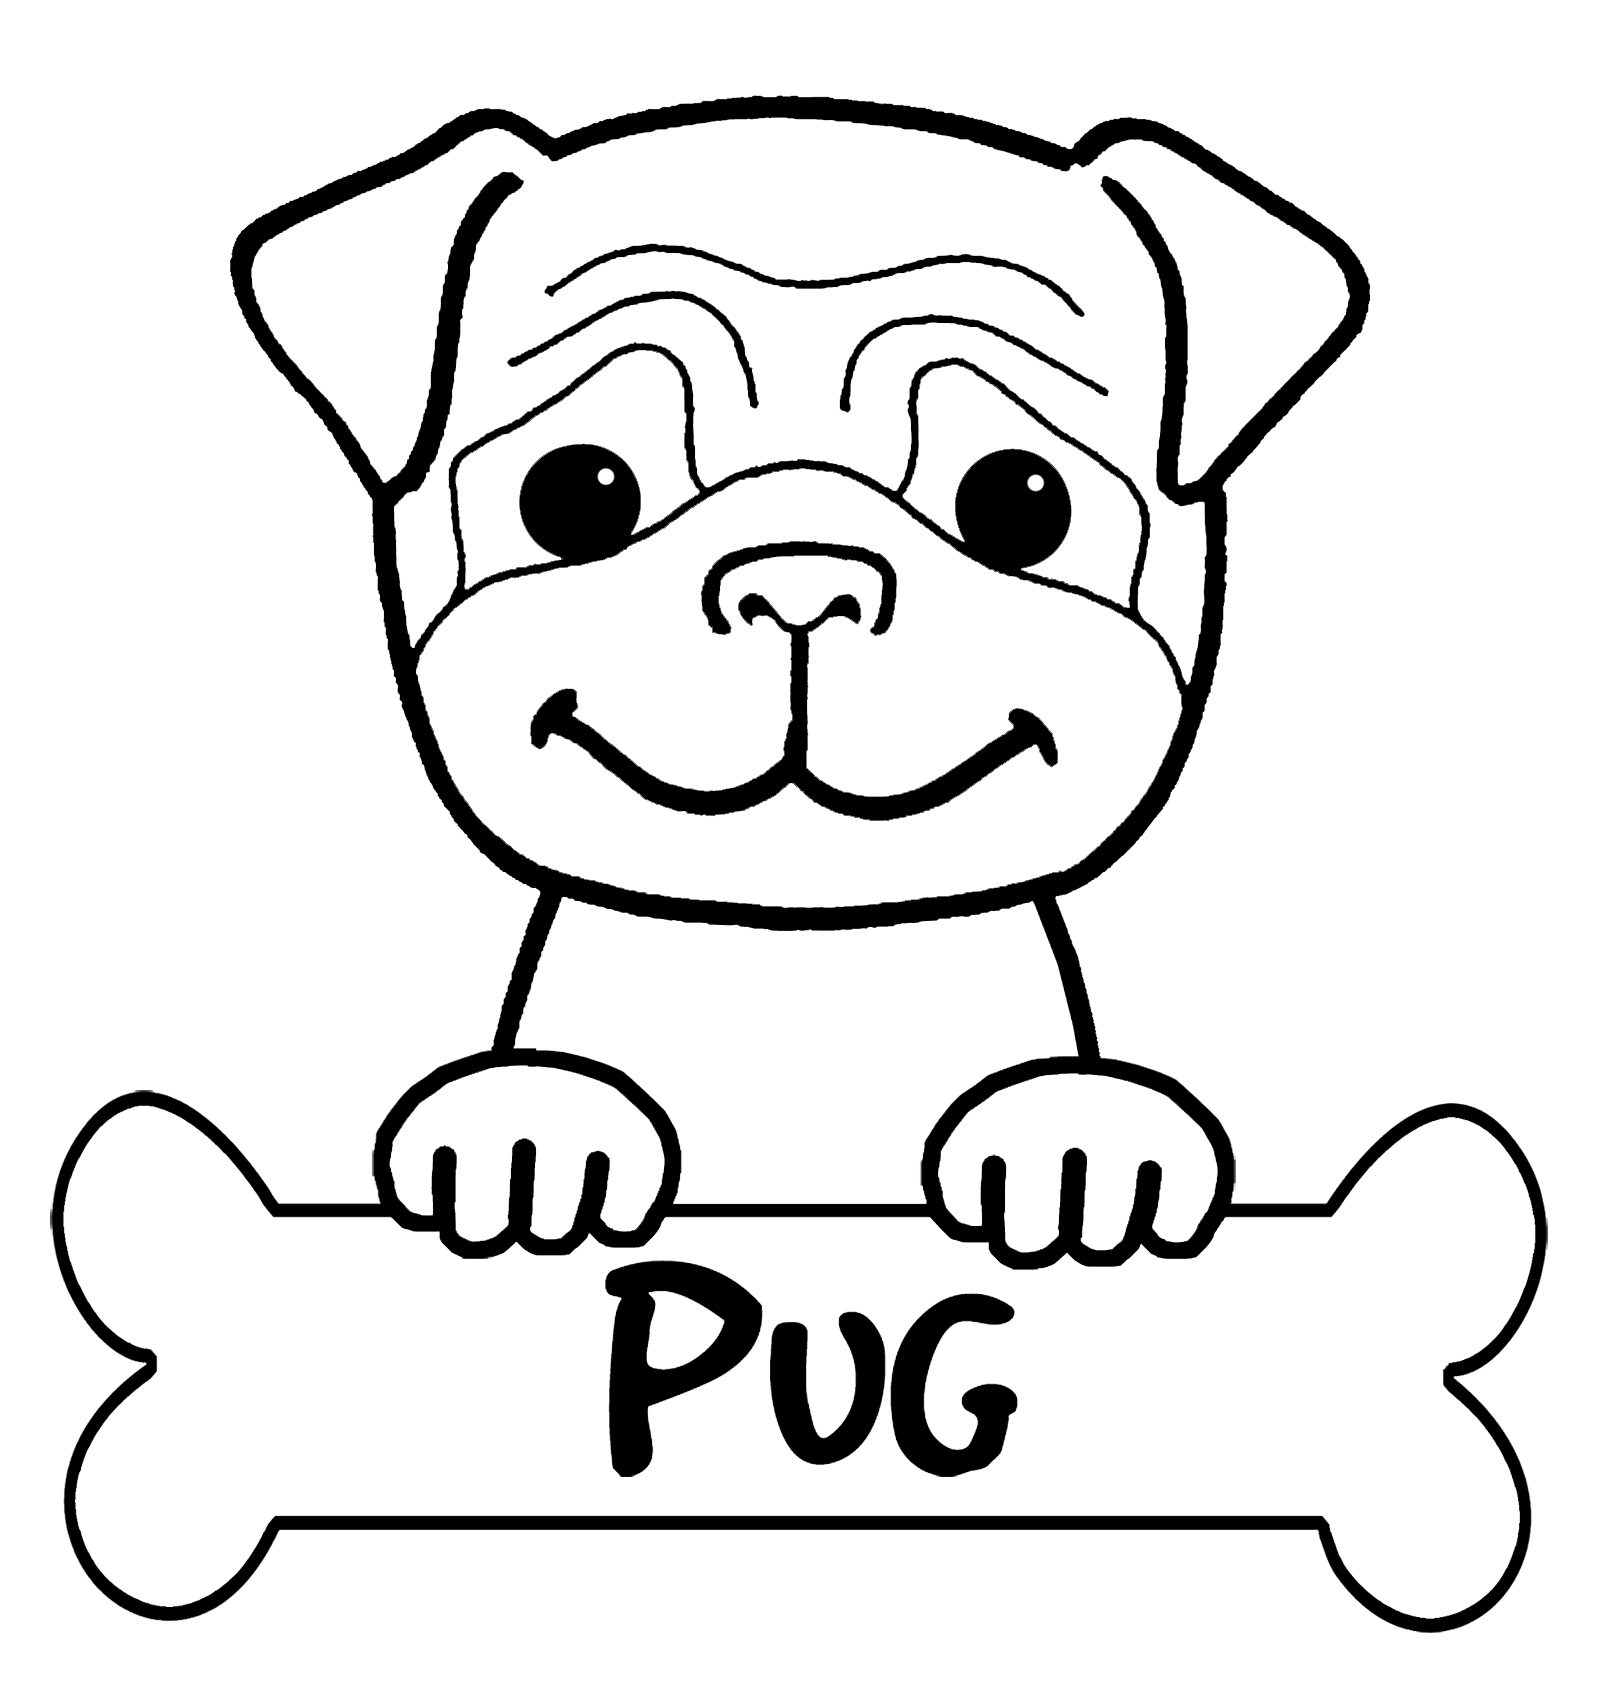 Pitbull Dog Coloring Pages Pitbull Terrier Coloring Pages. Kids ...